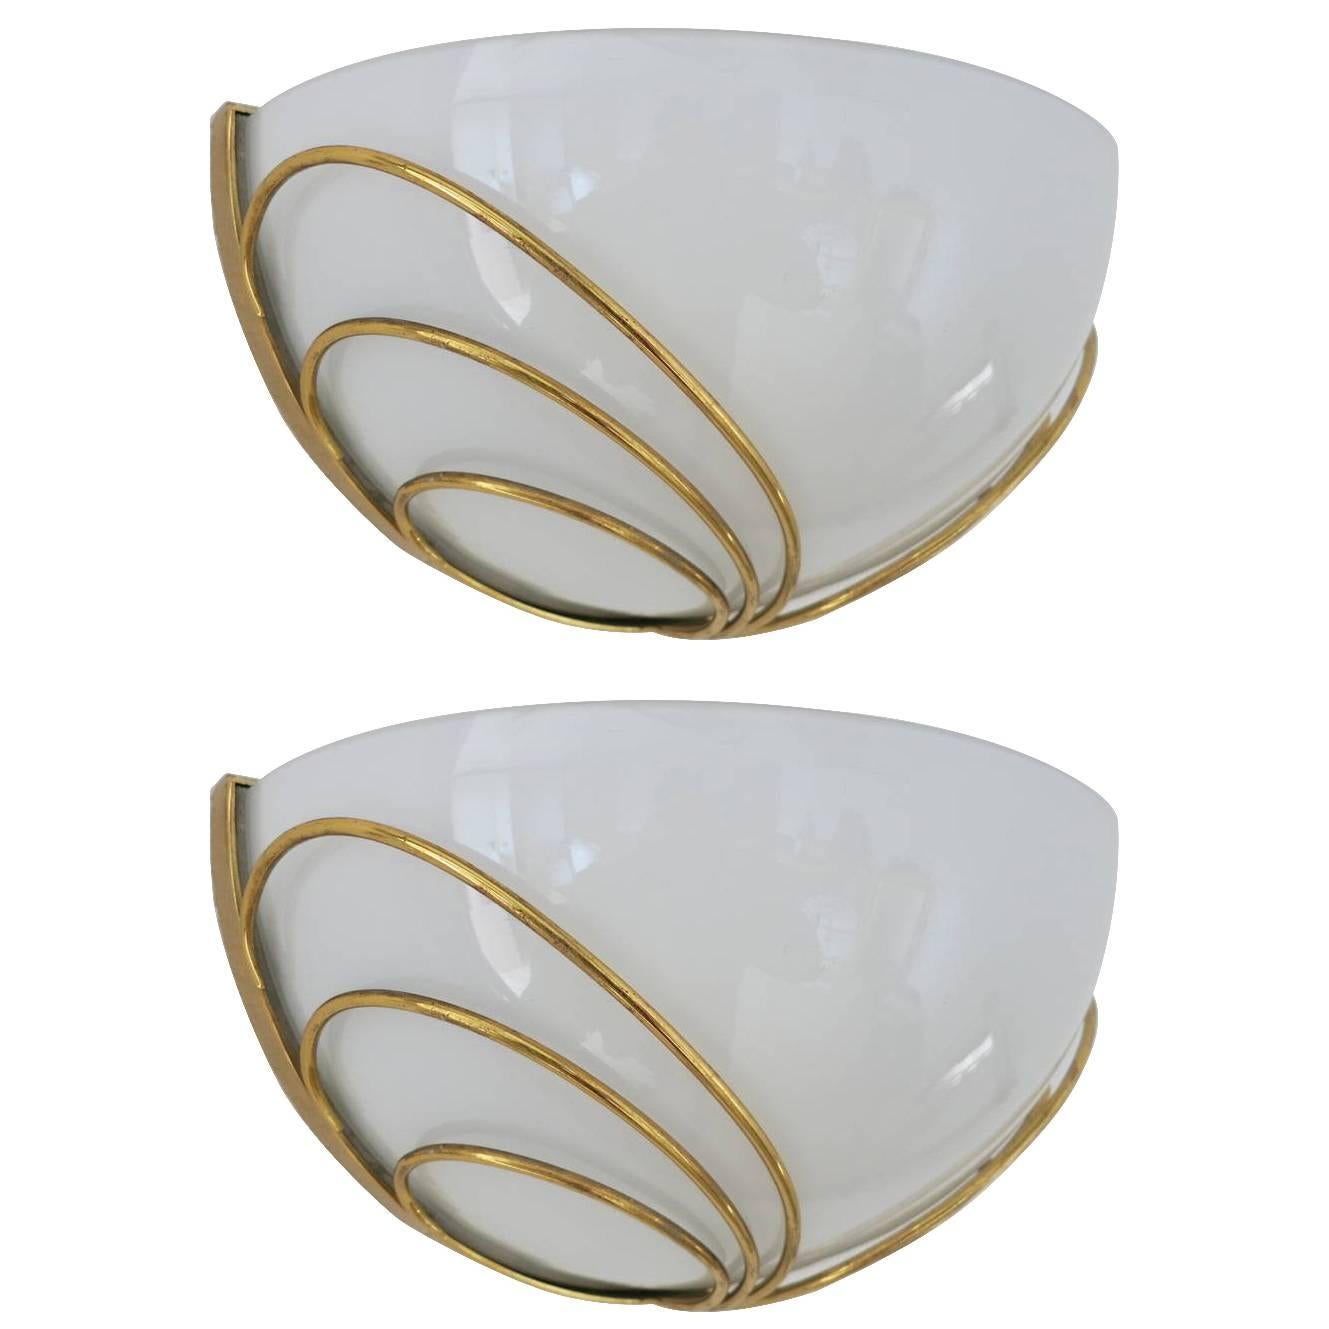 Vintage Italian Art Deco style wall lights with glossy white Murano glasses mounted on brass frames / Made in Italy in the 1960s
1 light / E26 or E27 type / max 60W
Width: 12 inches / Height: 6.5 inches / Depth: 6.5 inches
1 pair in stock in Palm